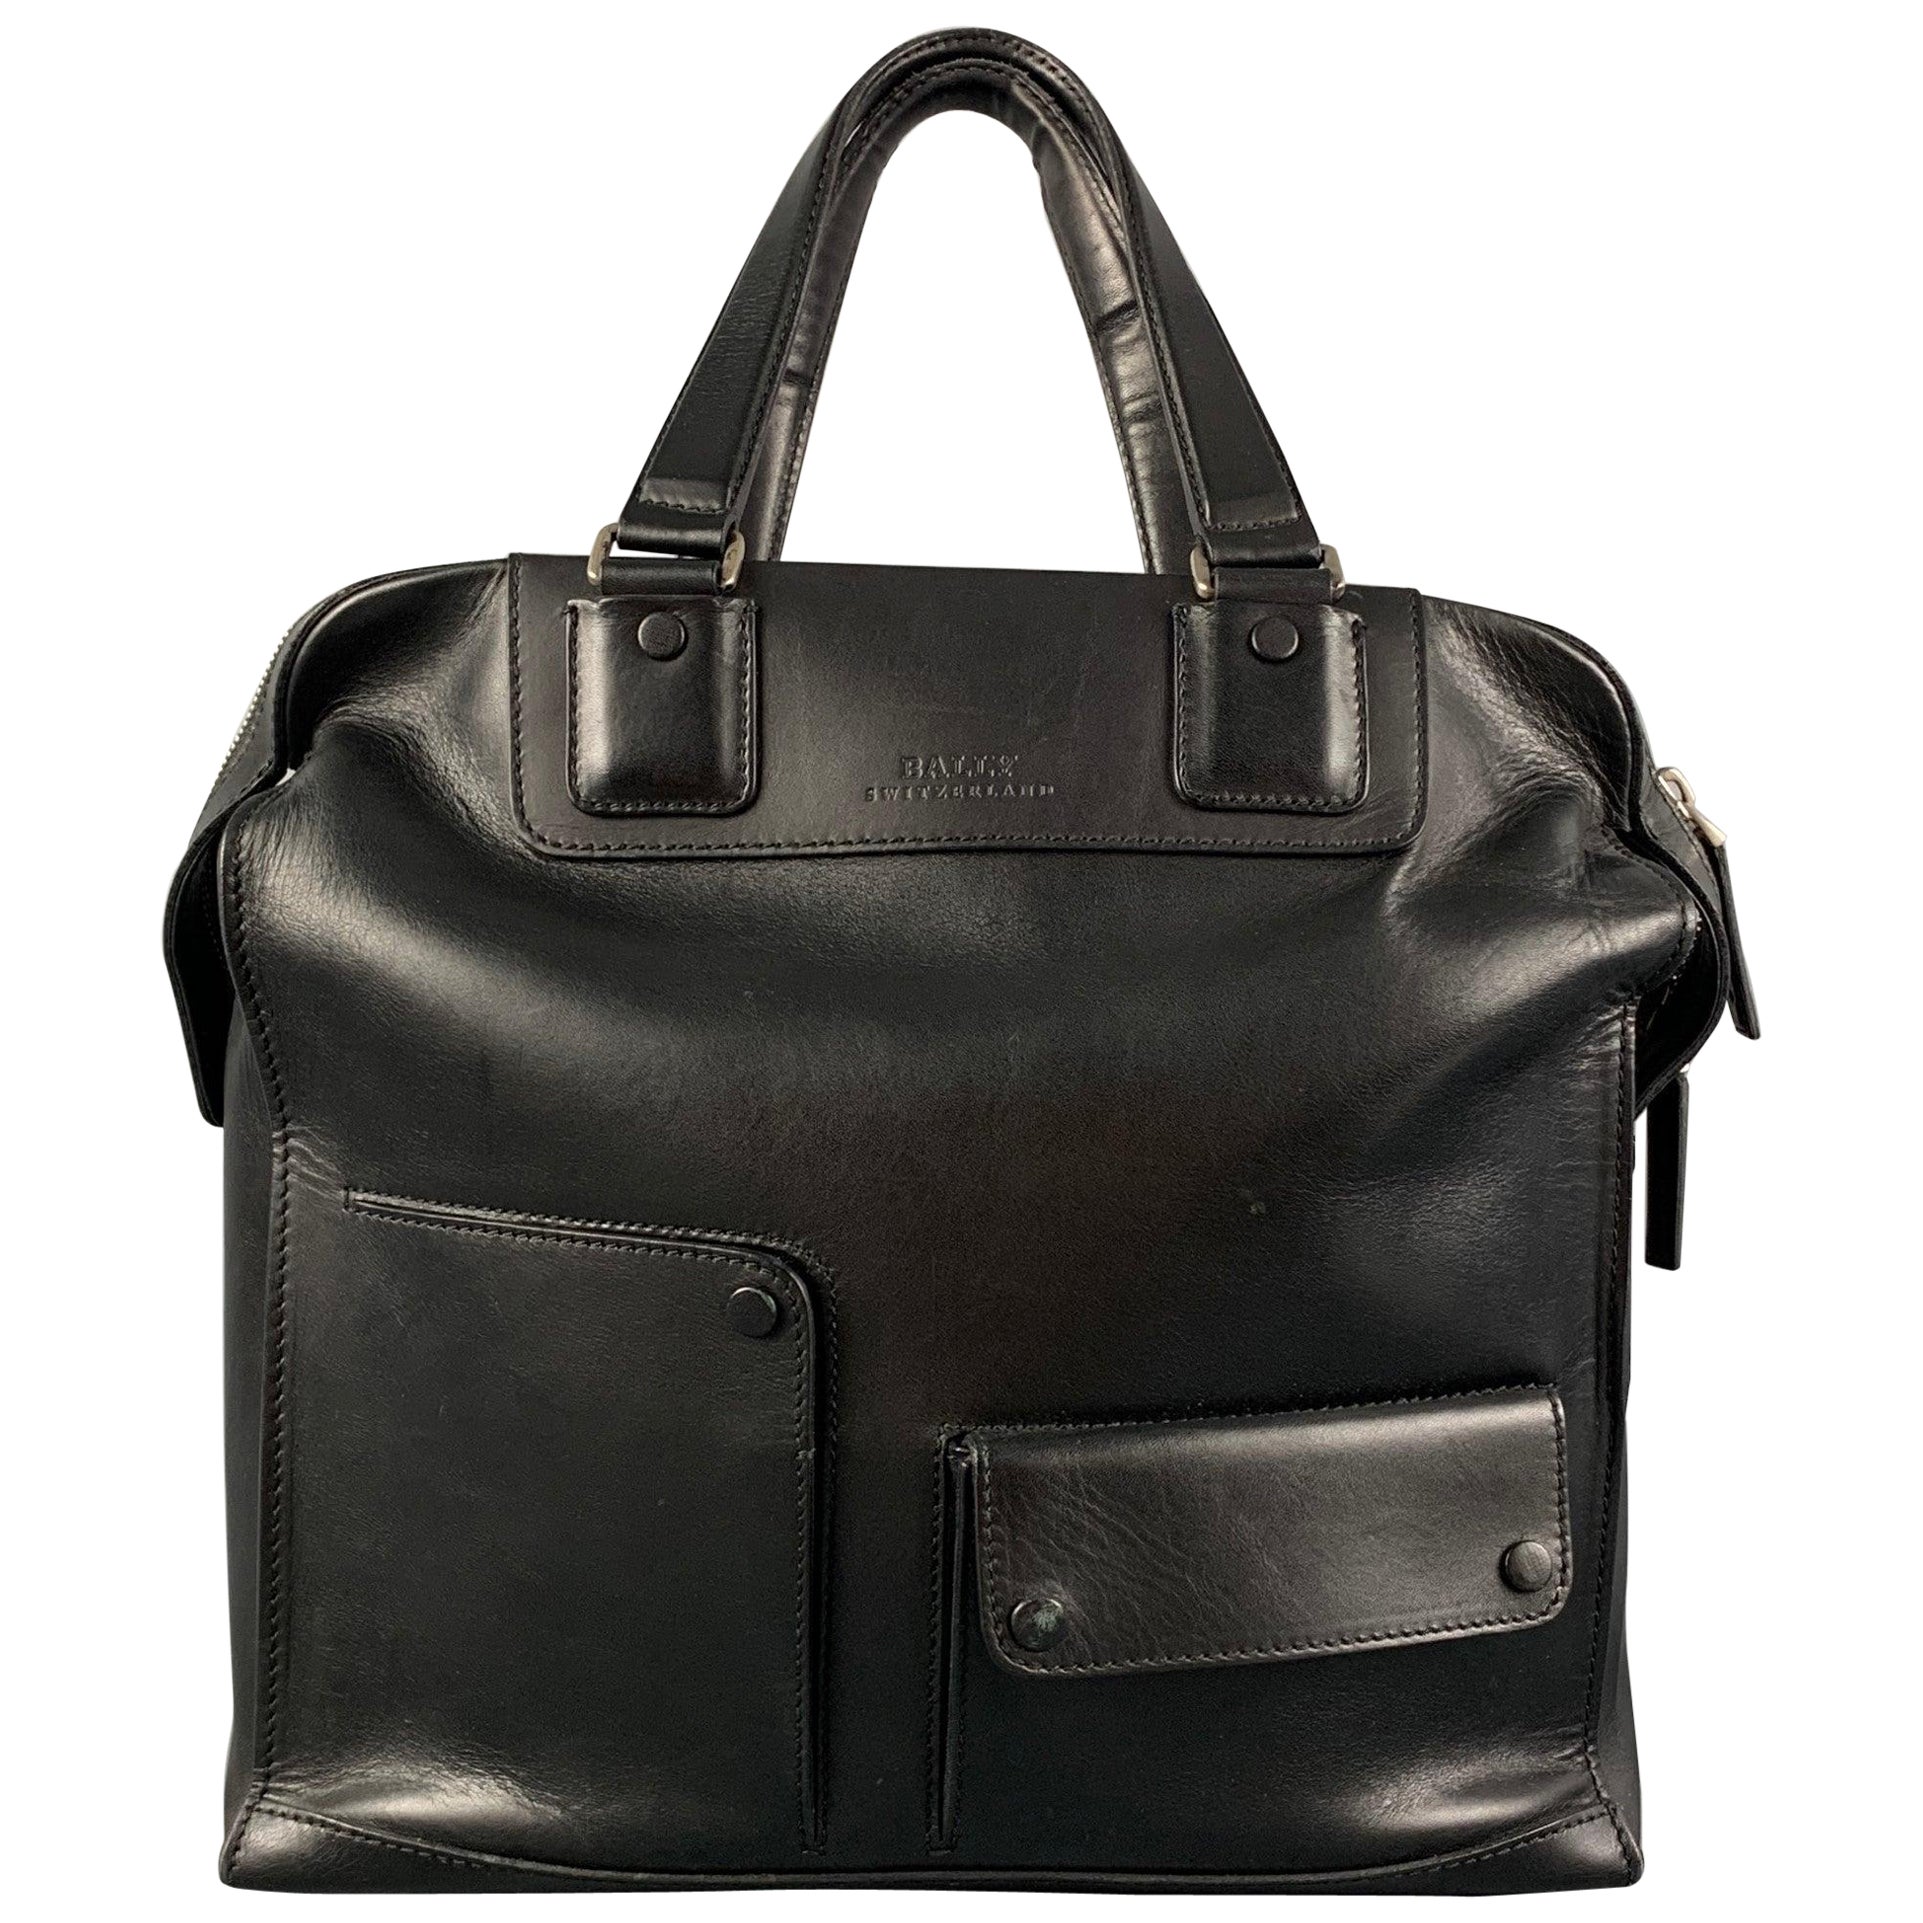 BALLY Black Leather Top Handles Tote Bag For Sale